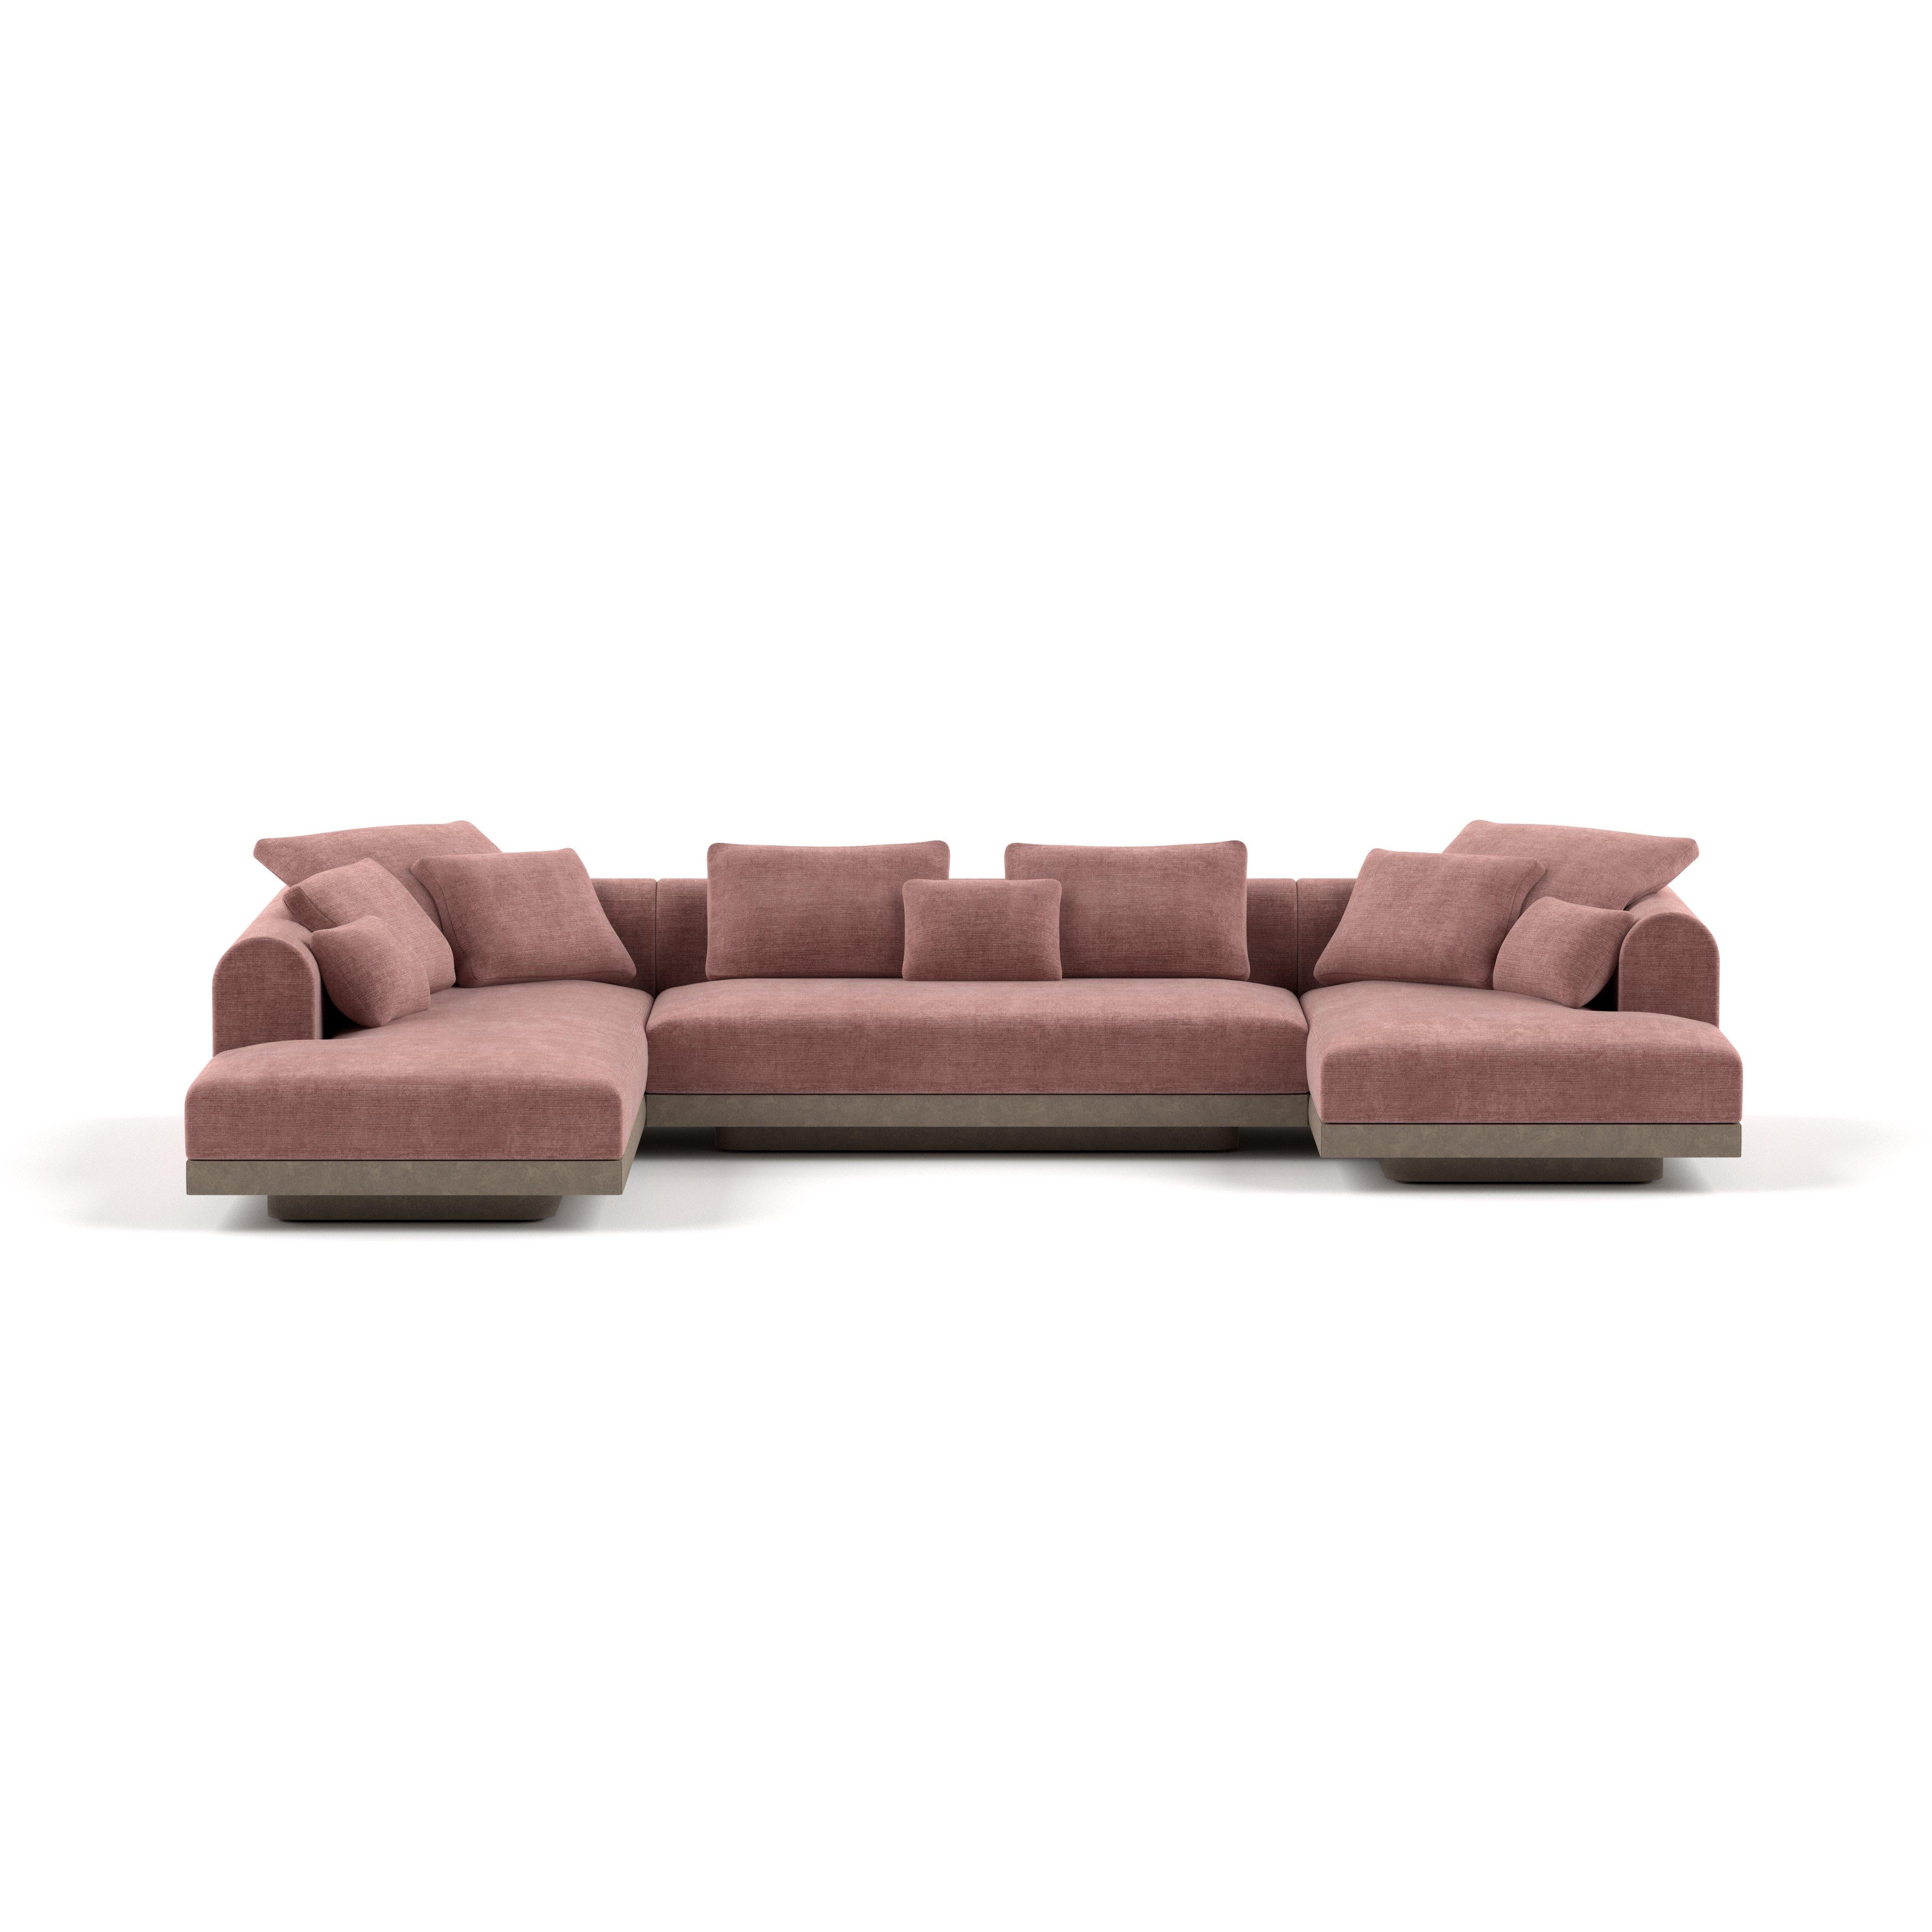 'Aqueduct' Contemporary Sofa by Poiat, Setup 4, Yang 95, HIgh Plinth For Sale 6